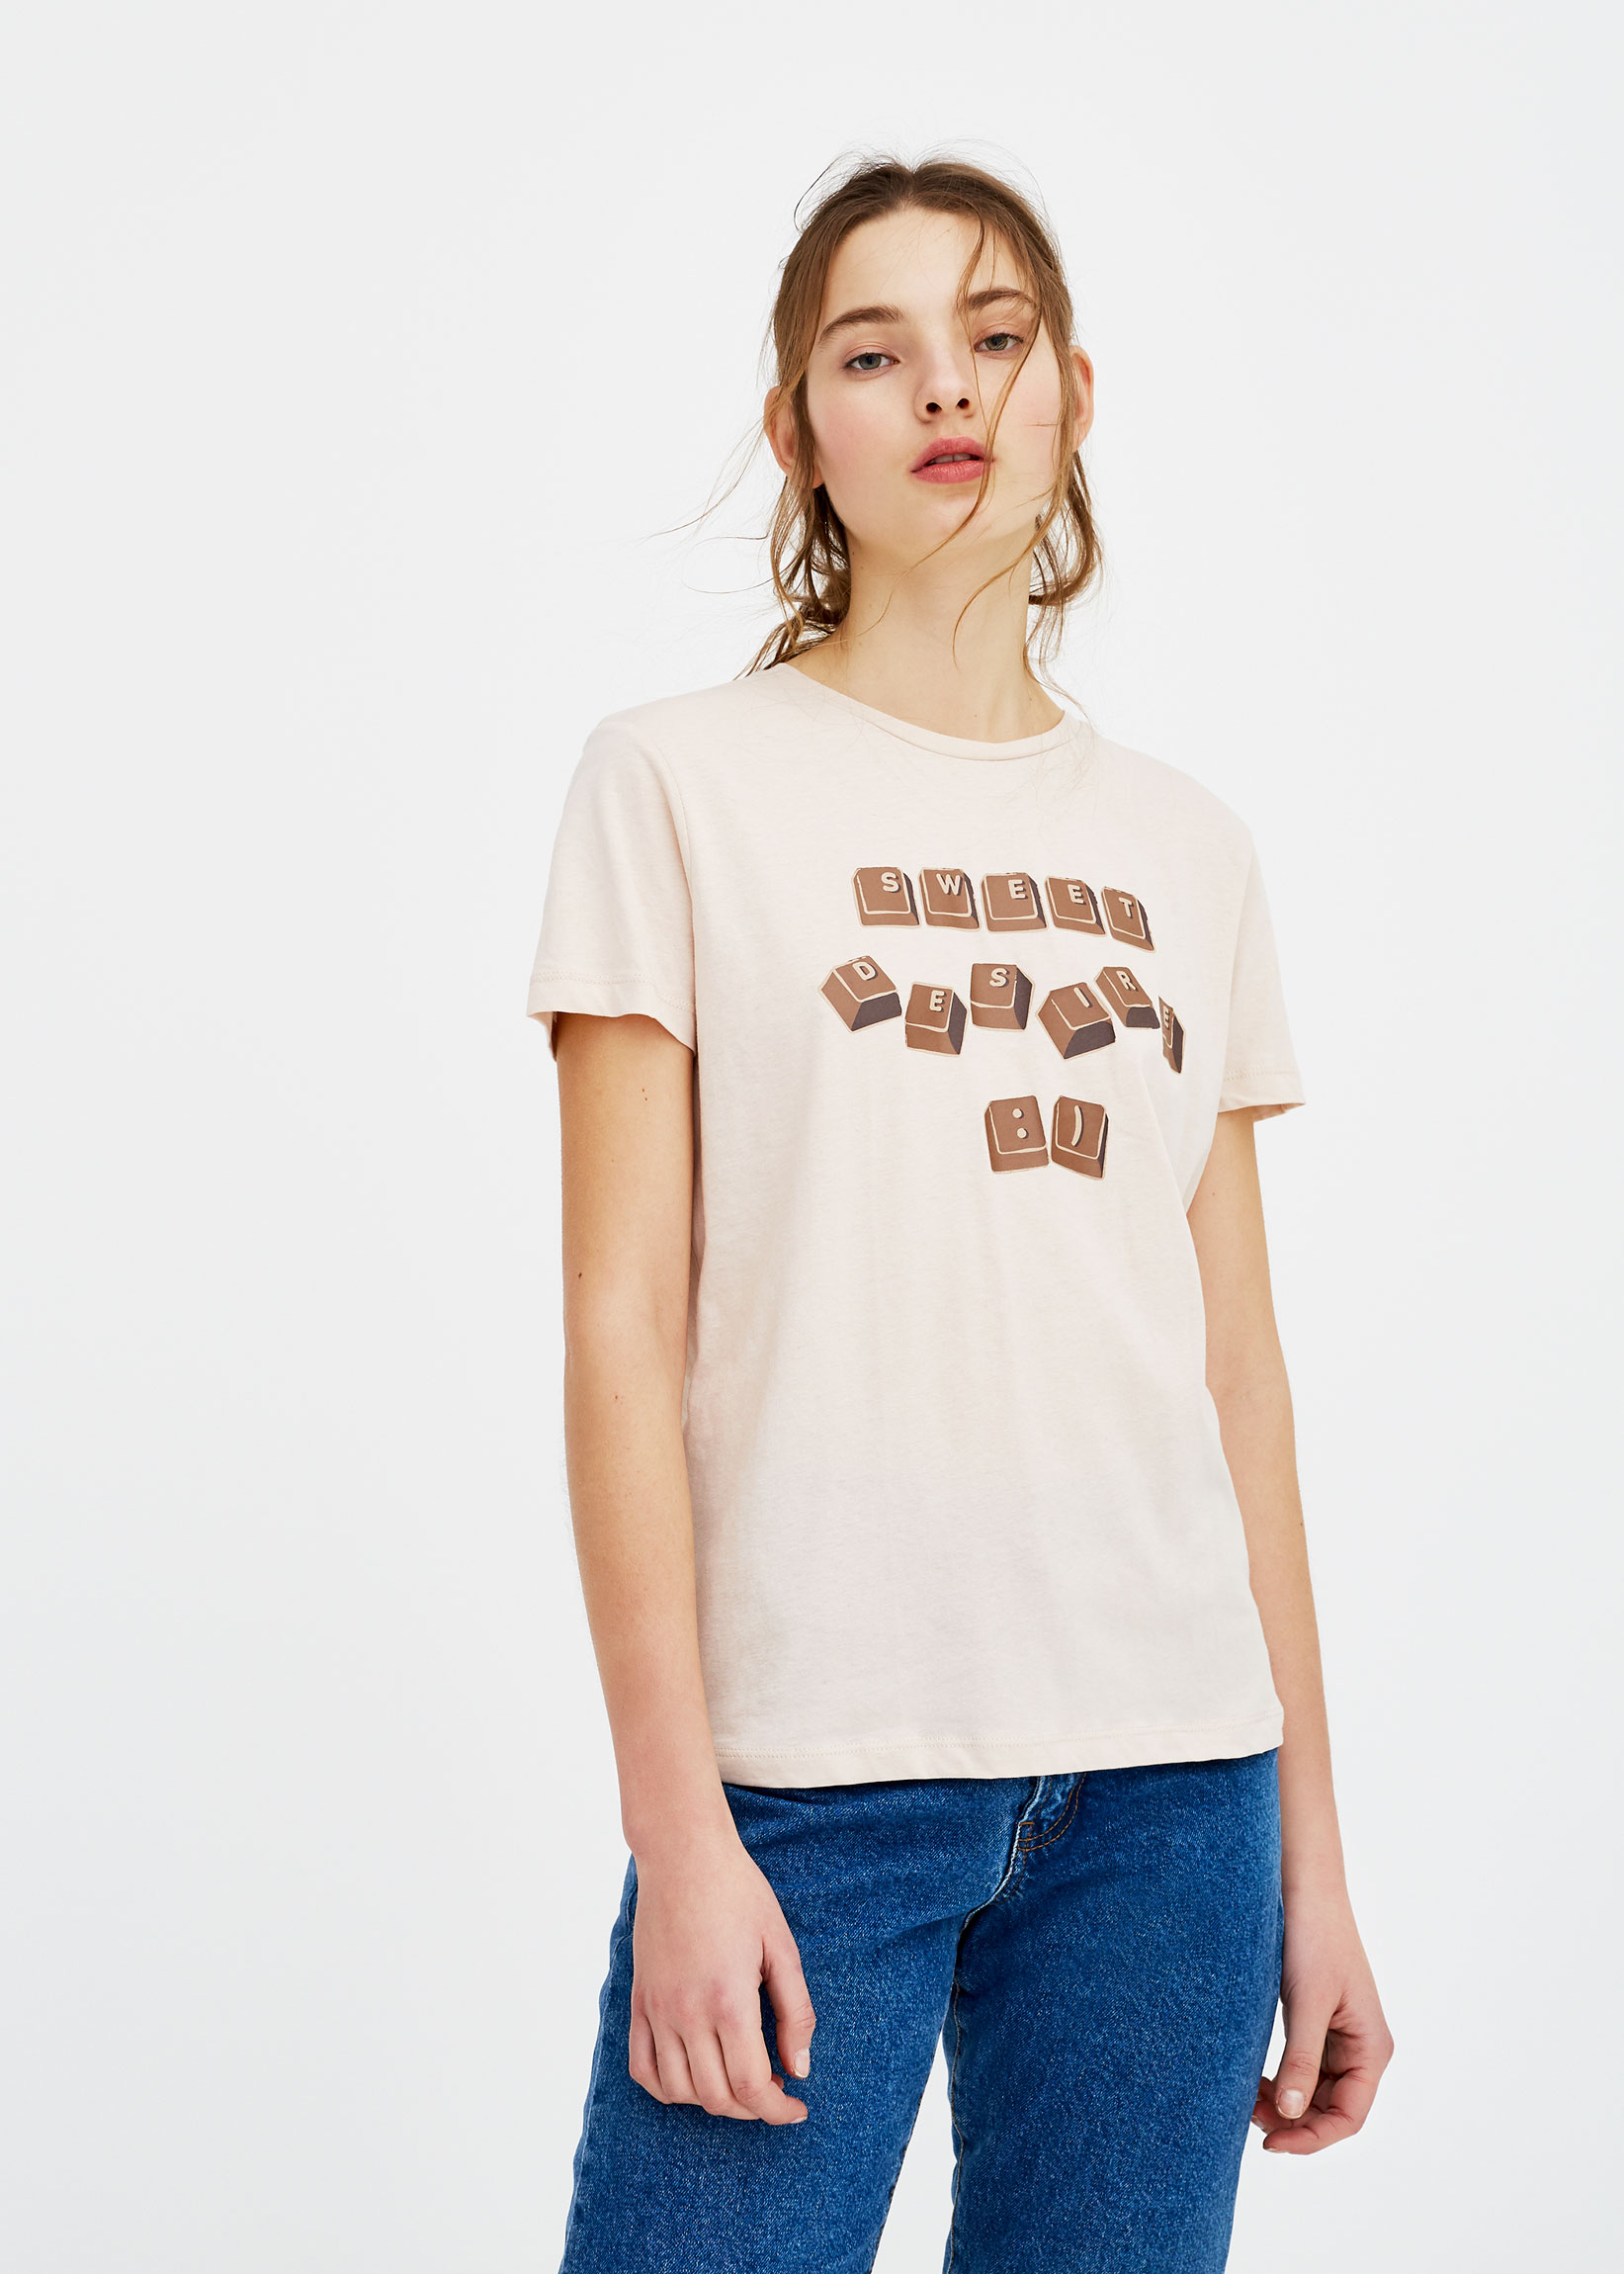 Pull & Bear Short sleeve T-shirt with illustration at £3.99 | love the ...